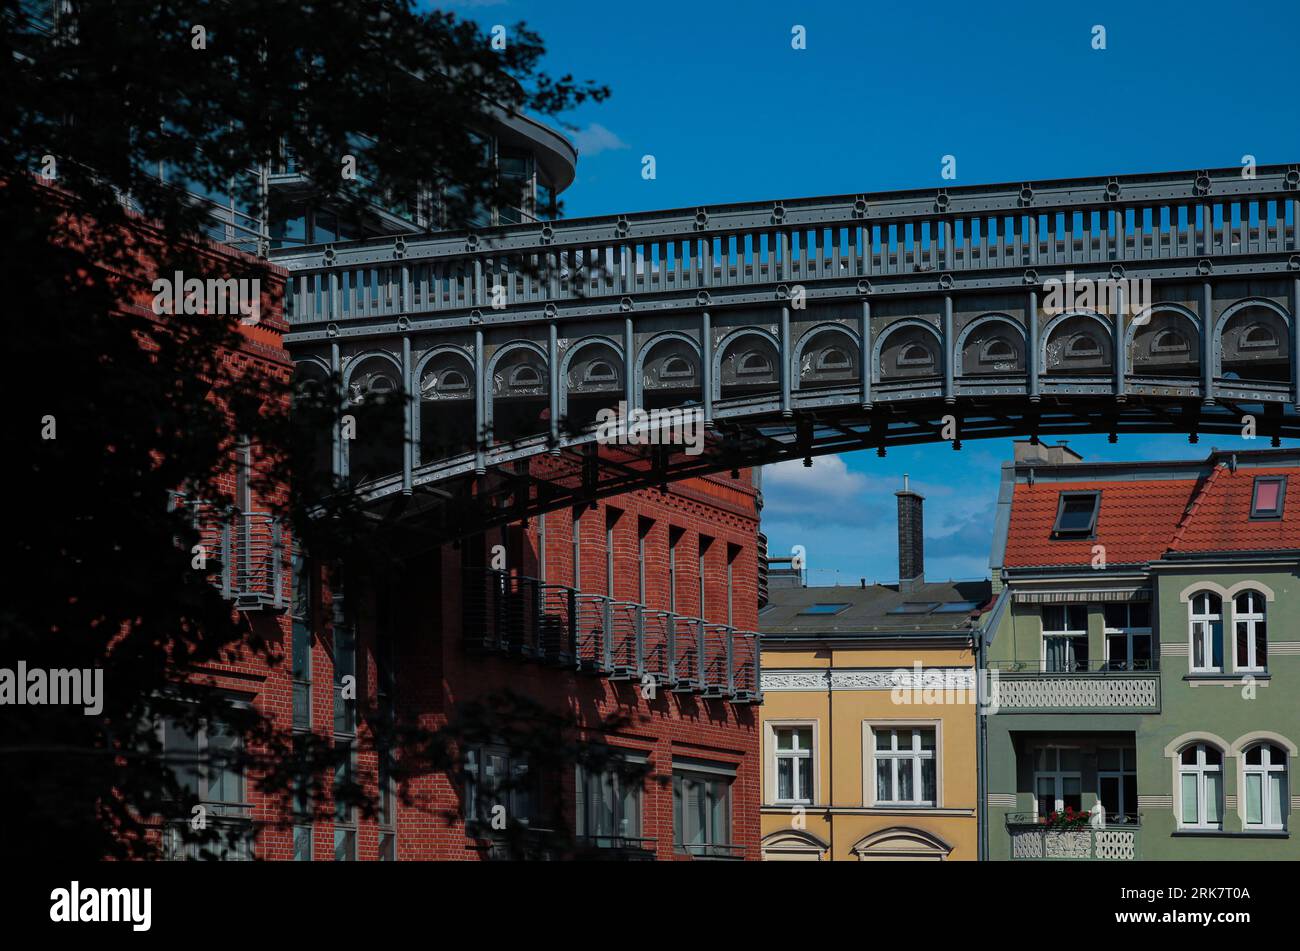 A majestic bridge on the brown brick building of the Stary Browar shopping center in Poznan, Poland Stock Photo